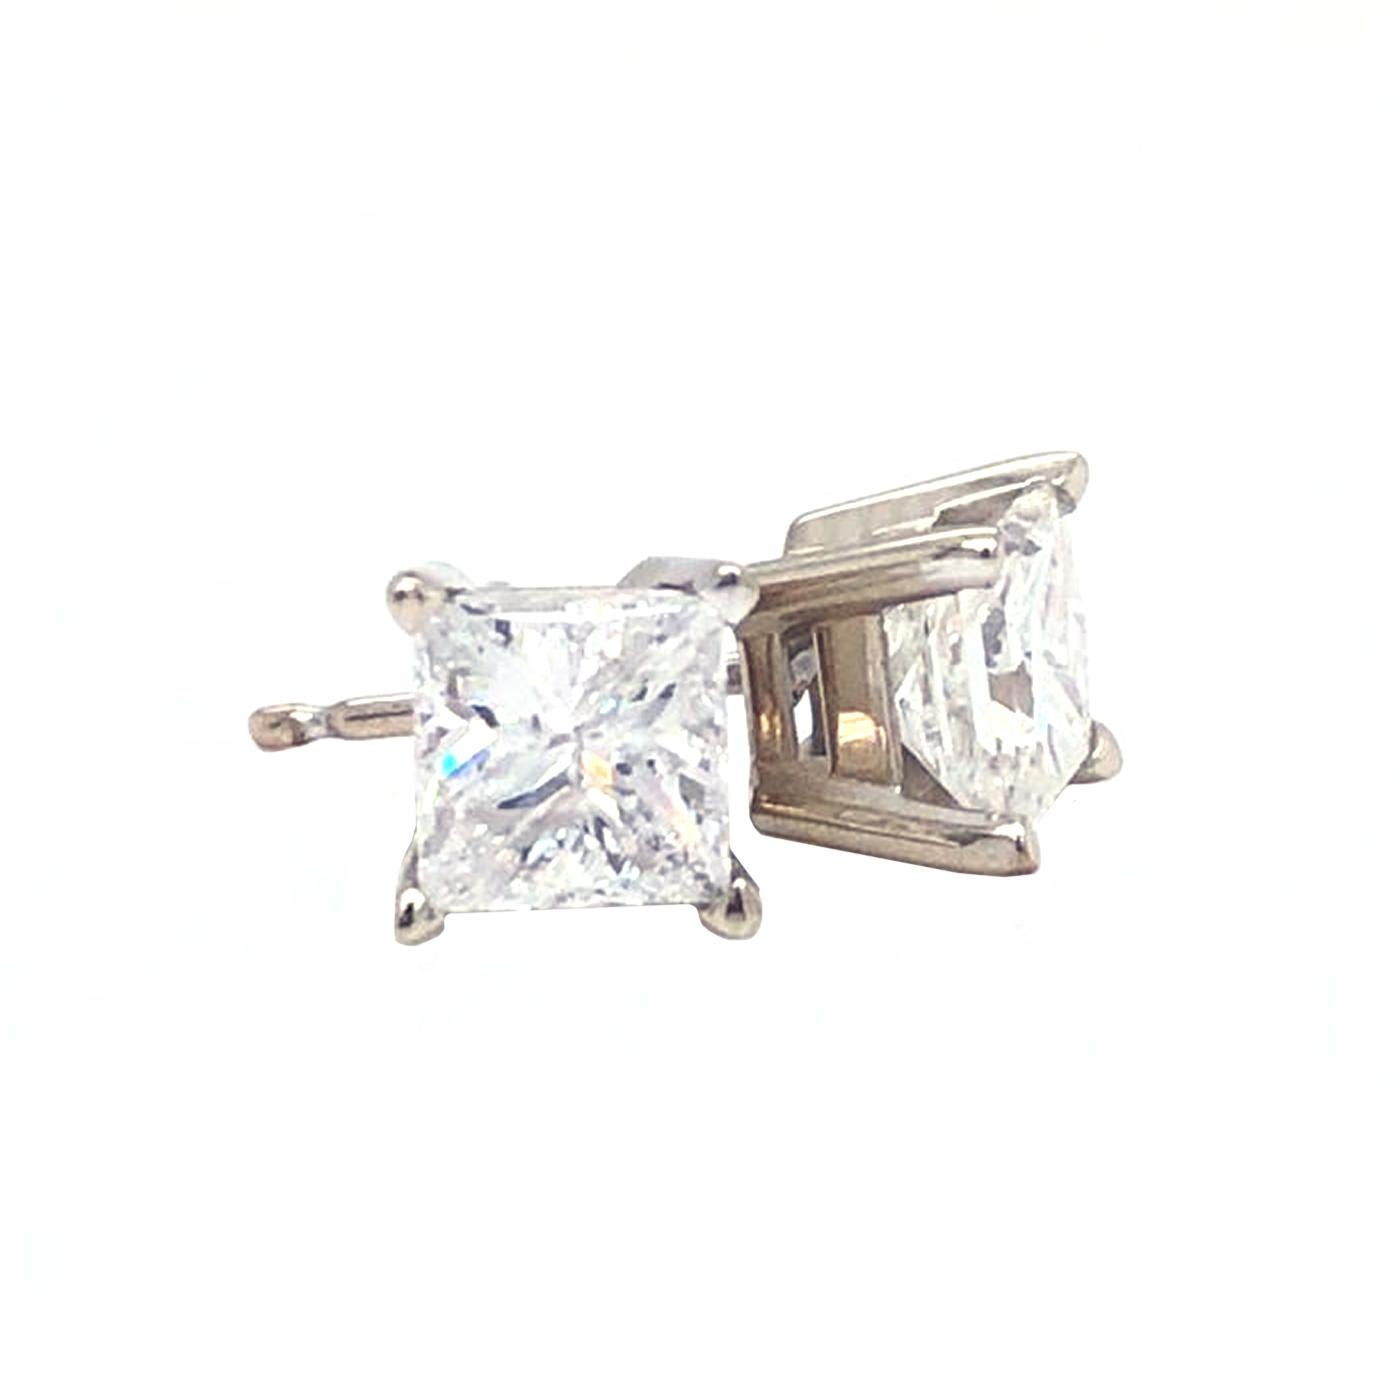 These 4 Prong stunning earrings are bound to sweep your girl off her feet. These diamonds have a total weight of 1.45 carat, have a SI2 - SI3 and a H - G in color. The diamonds are set in a 14 karat solid gold setting. Don't wait to own a classic